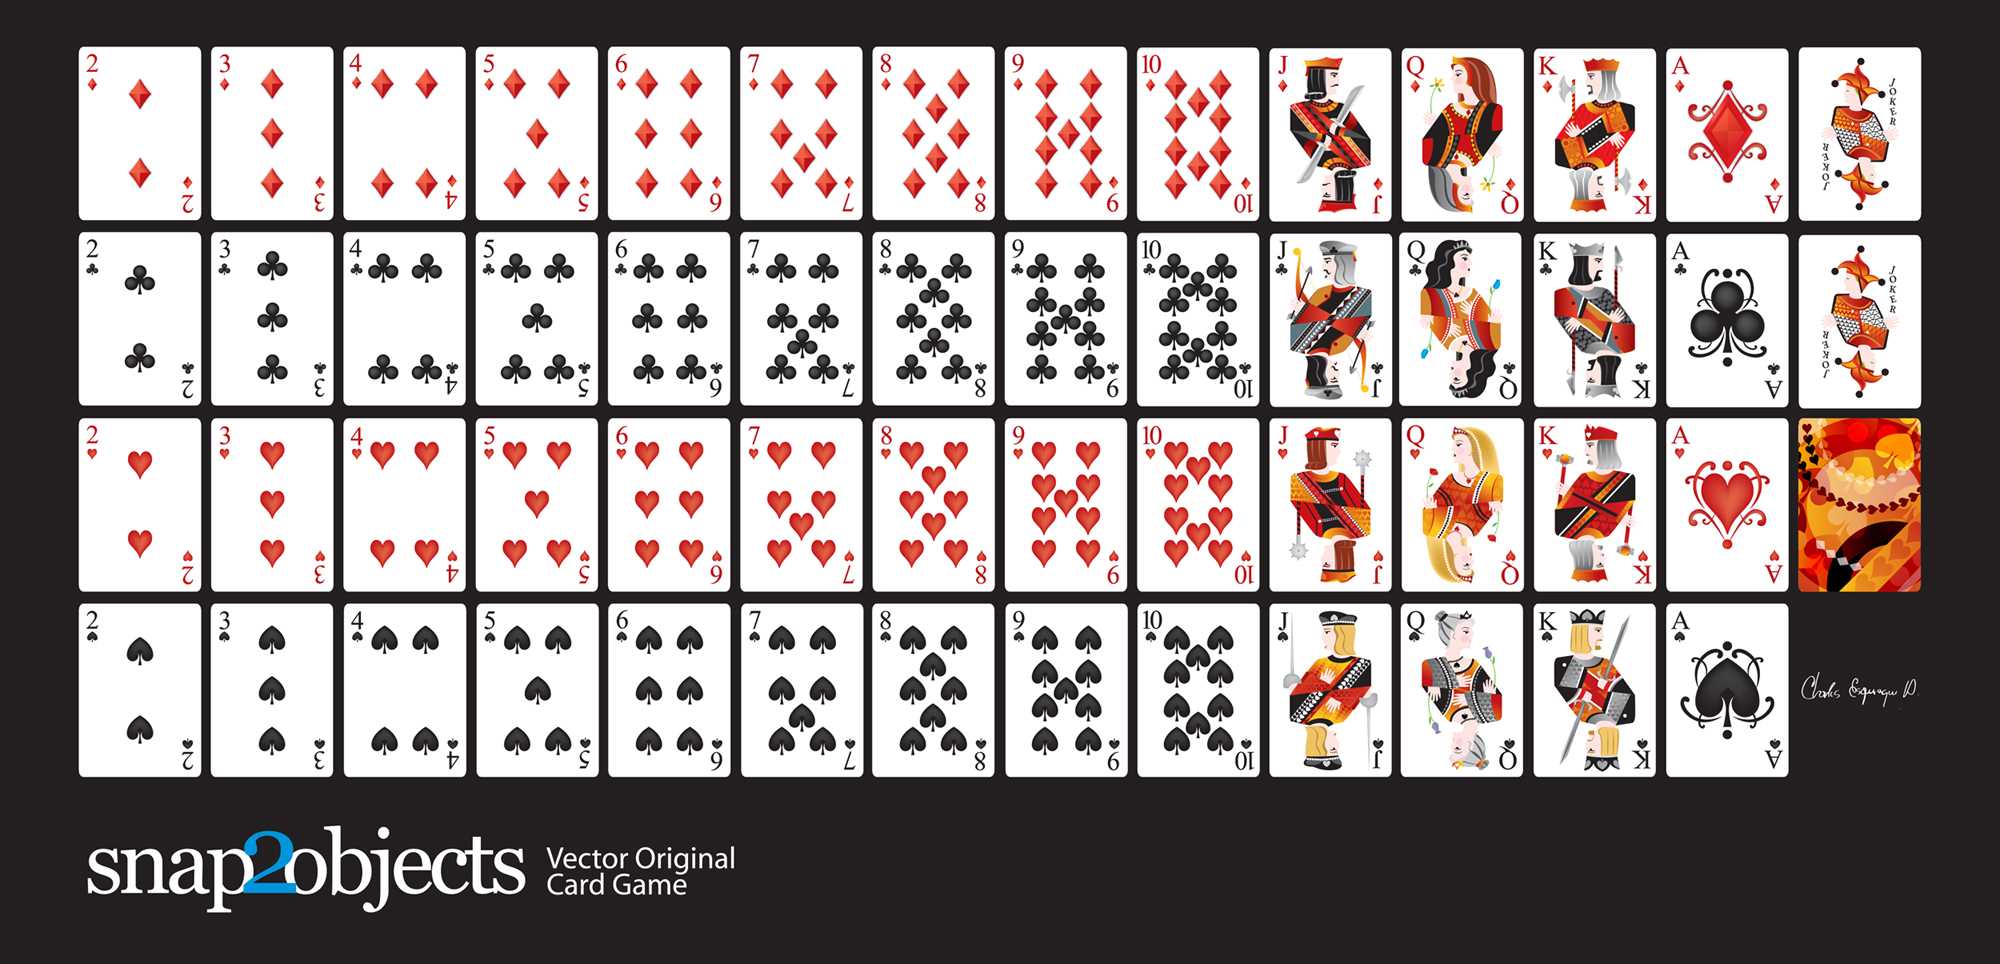 Playing Card Vector Art At Getdrawings | Free For Throughout Playing Card Design Template